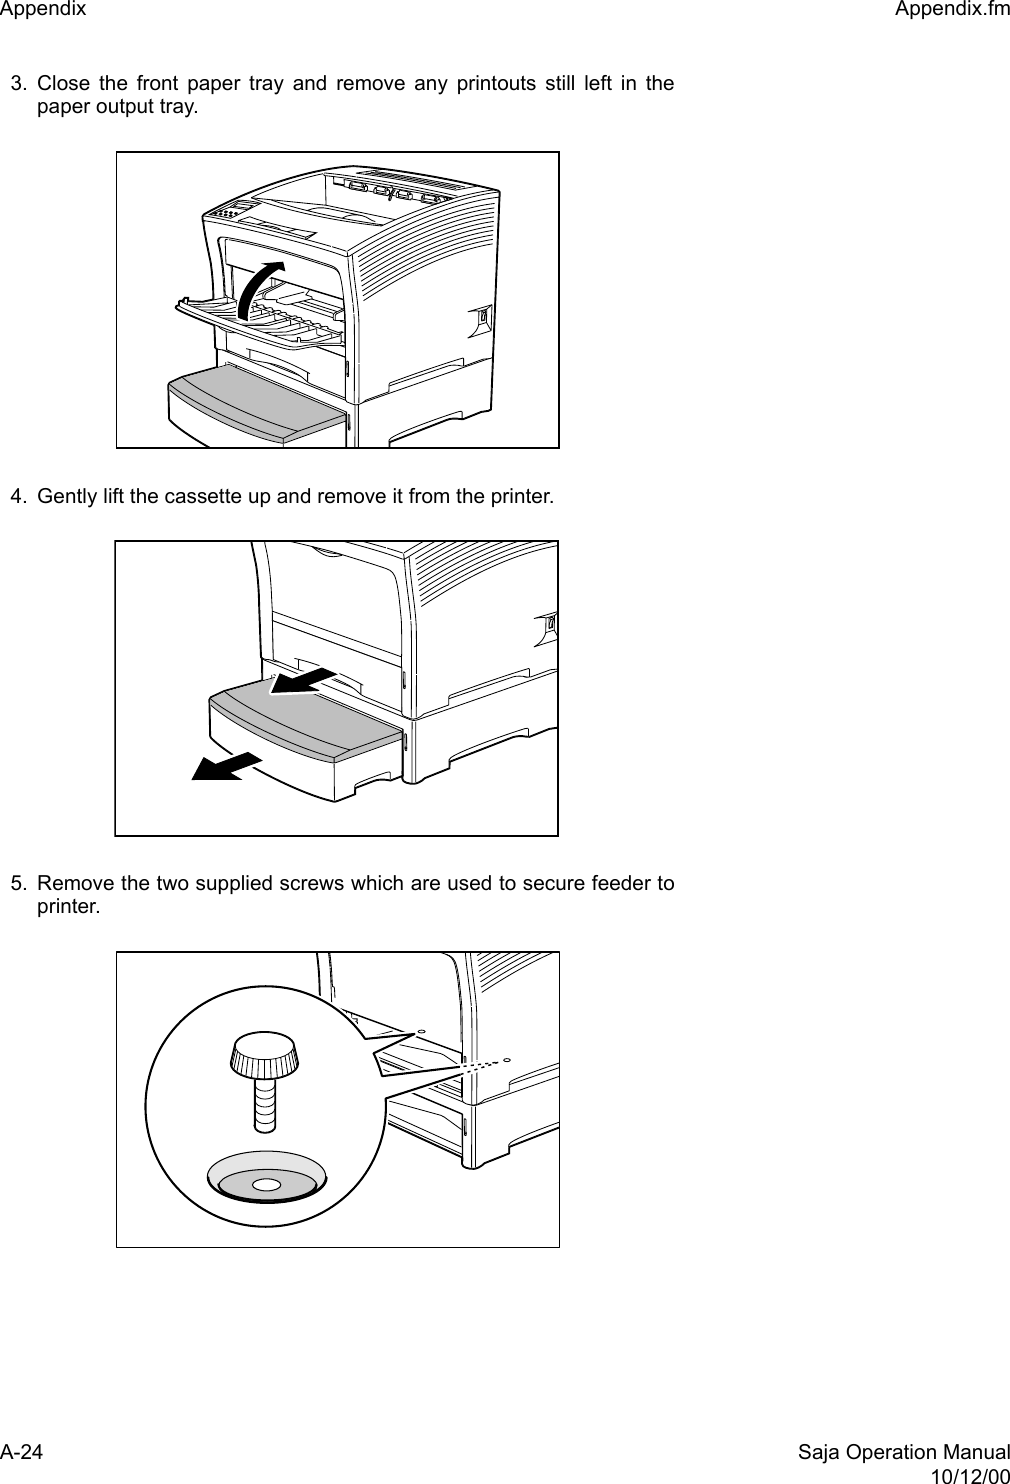 A-24 Saja Operation Manual10/12/00Appendix  Appendix.fm3. Close the front paper tray and remove any printouts still left in thepaper output tray. 4. Gently lift the cassette up and remove it from the printer. 5. Remove the two supplied screws which are used to secure feeder toprinter. 